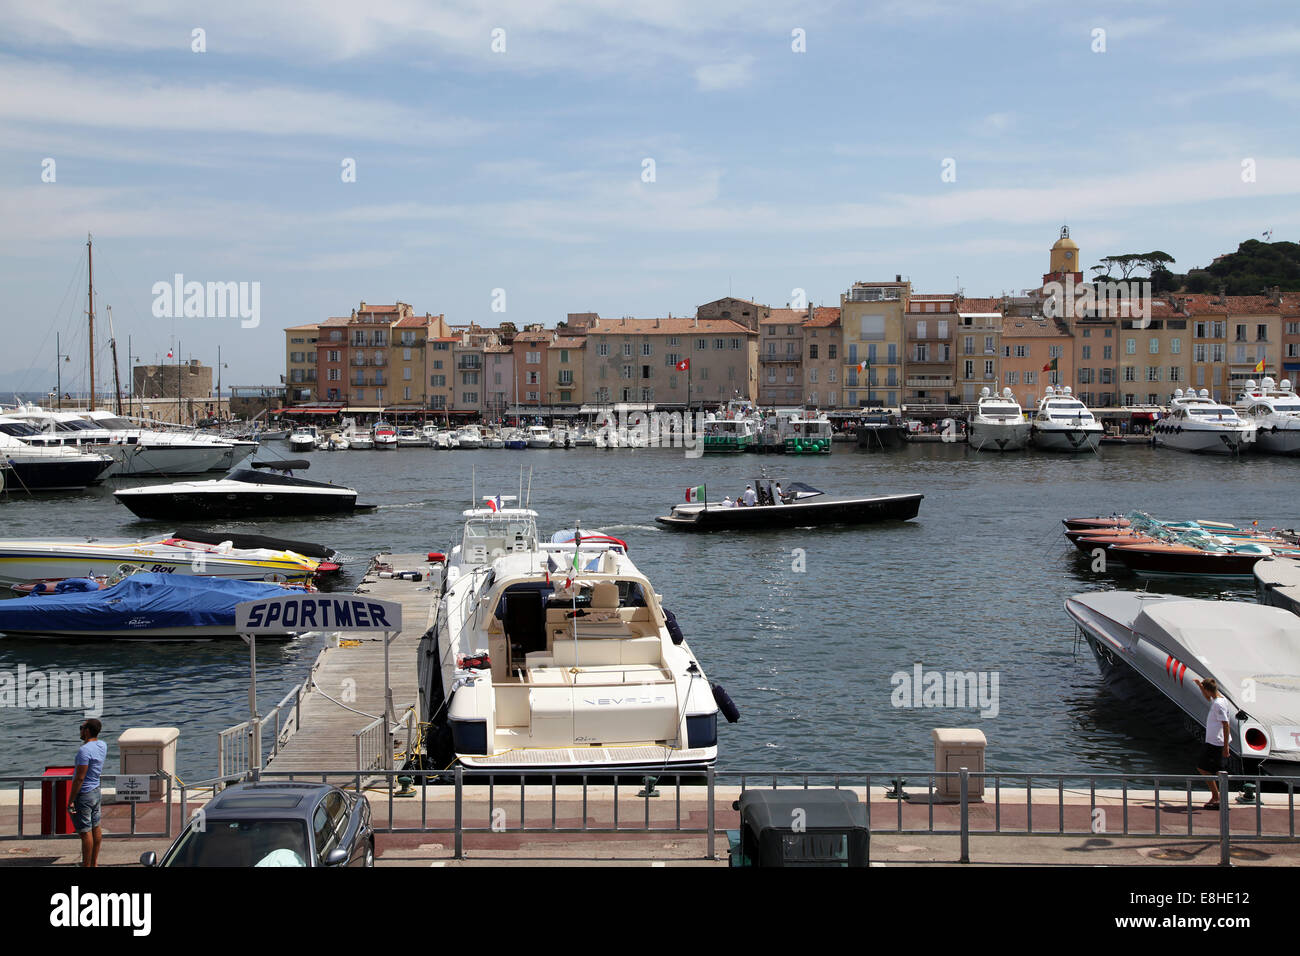 Port of Saint-Tropez.Provençal town in the Var department of the Provence-Alpes-Côte d'Azur region of southeastern France.The French Riviera Stock Photo